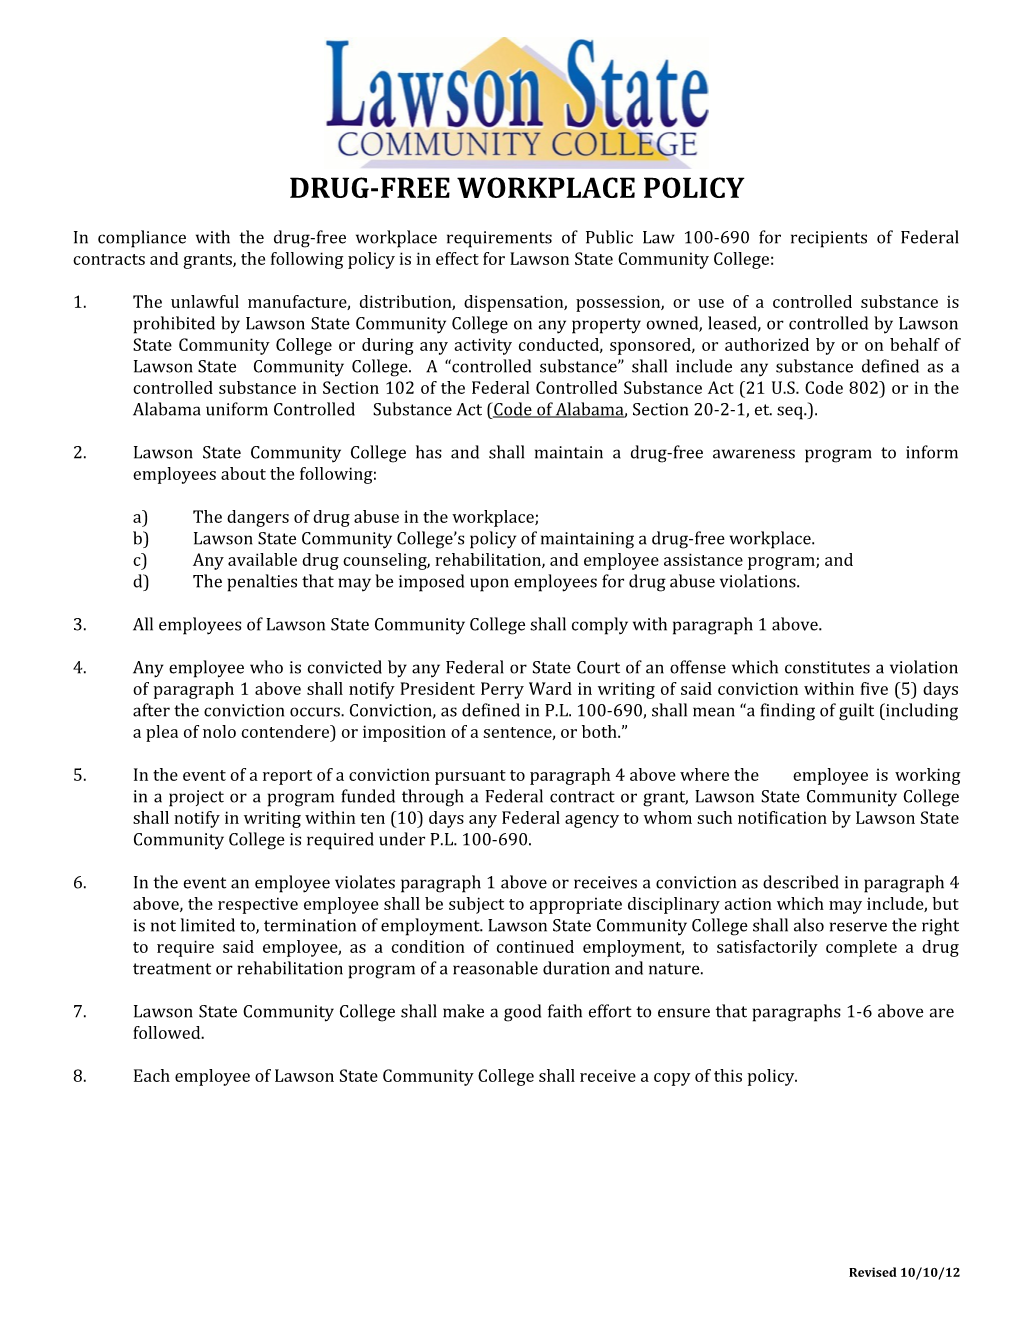 Drug-Free Workplace Policy s1